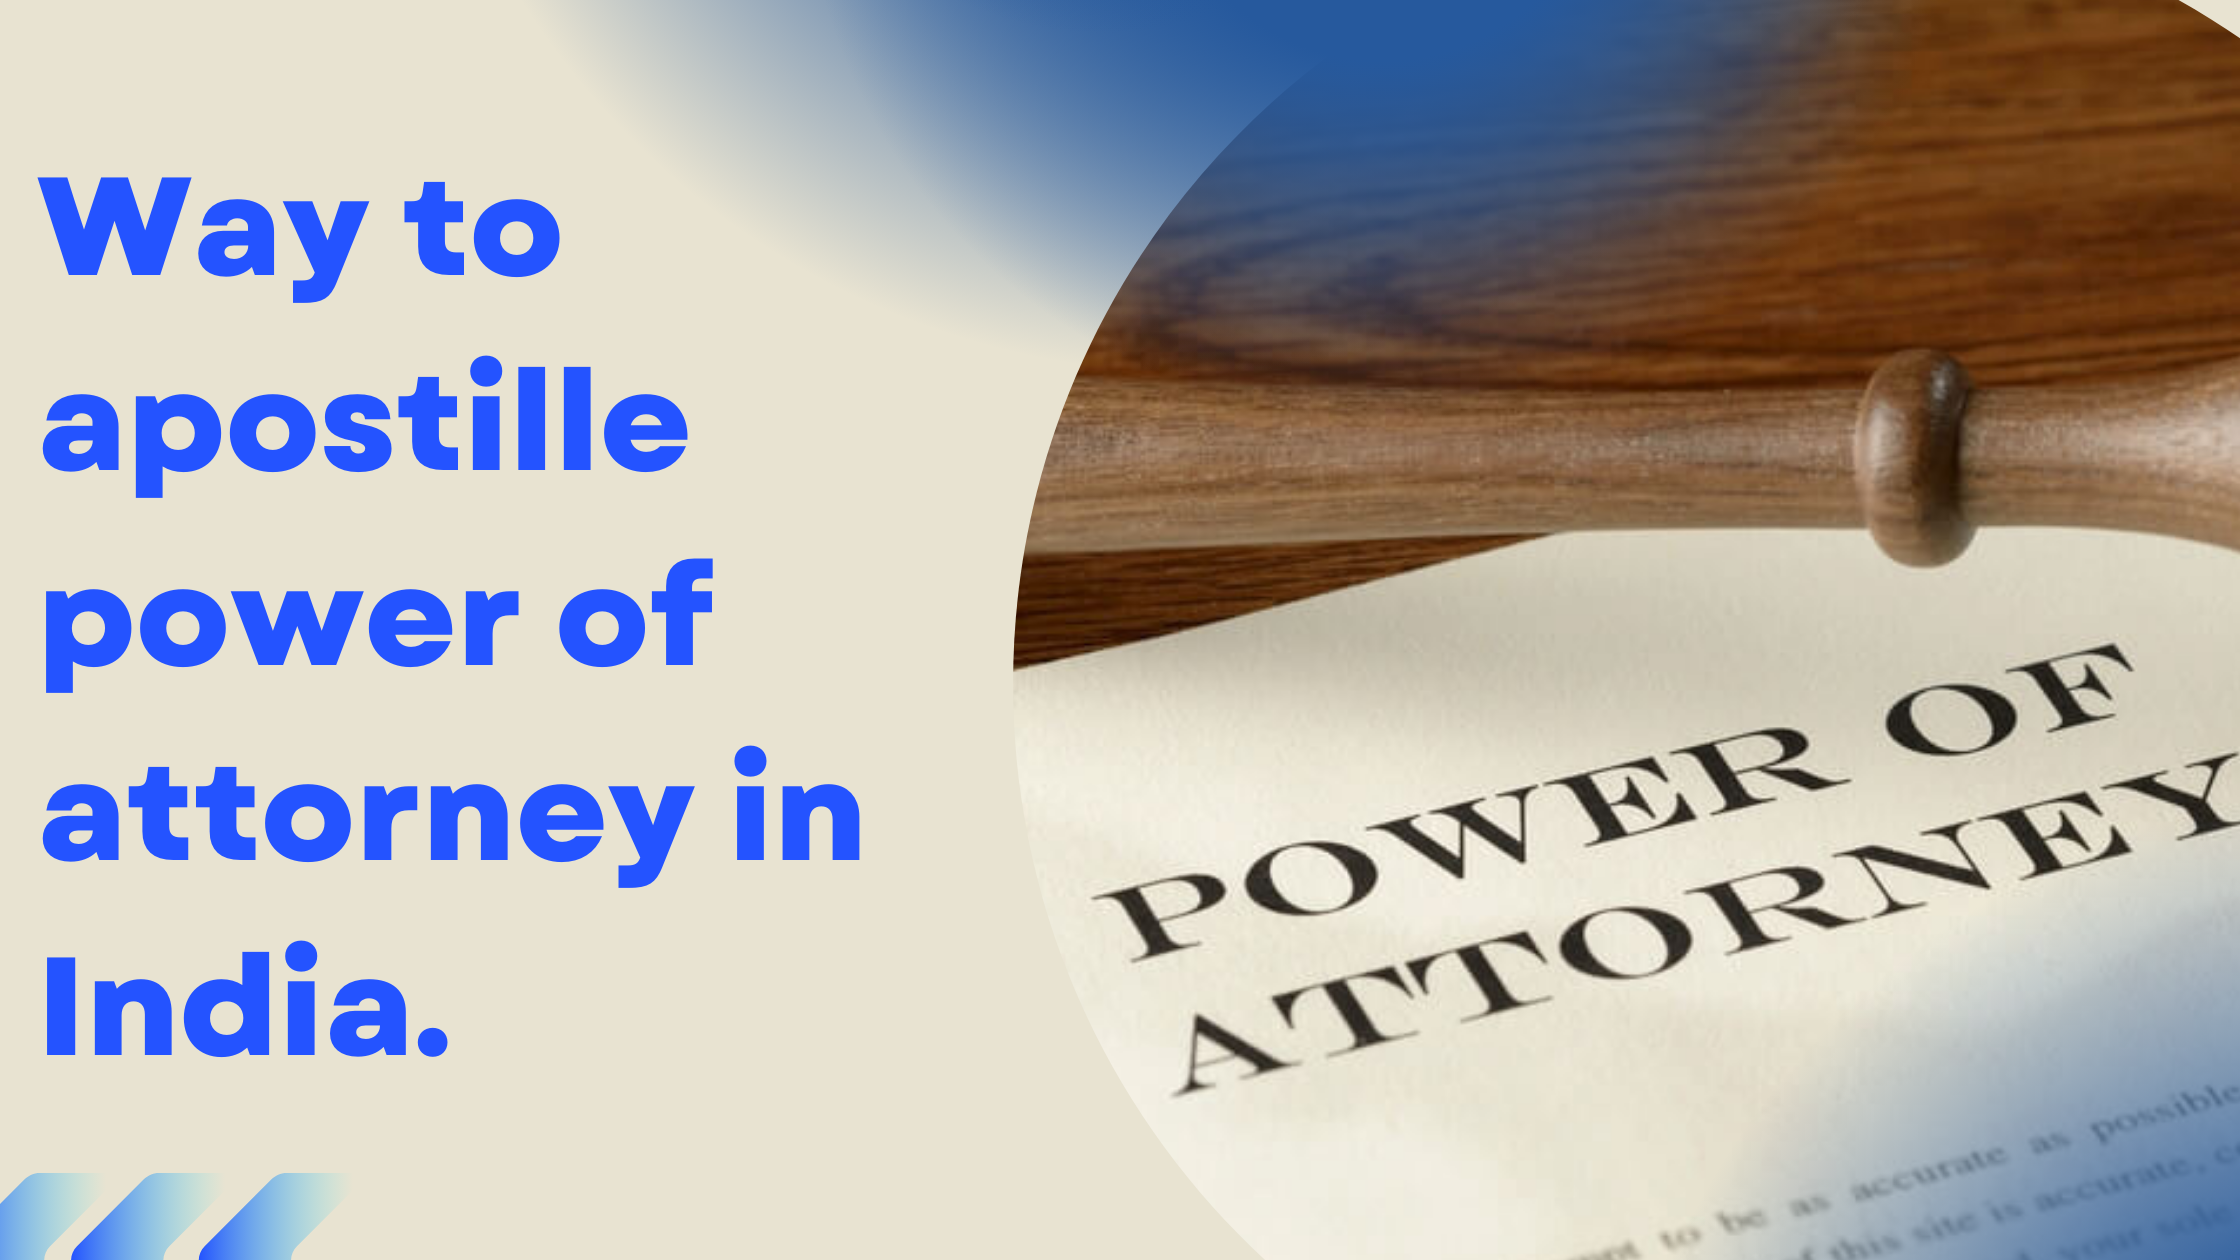 Way to apostille power of attorney in India.